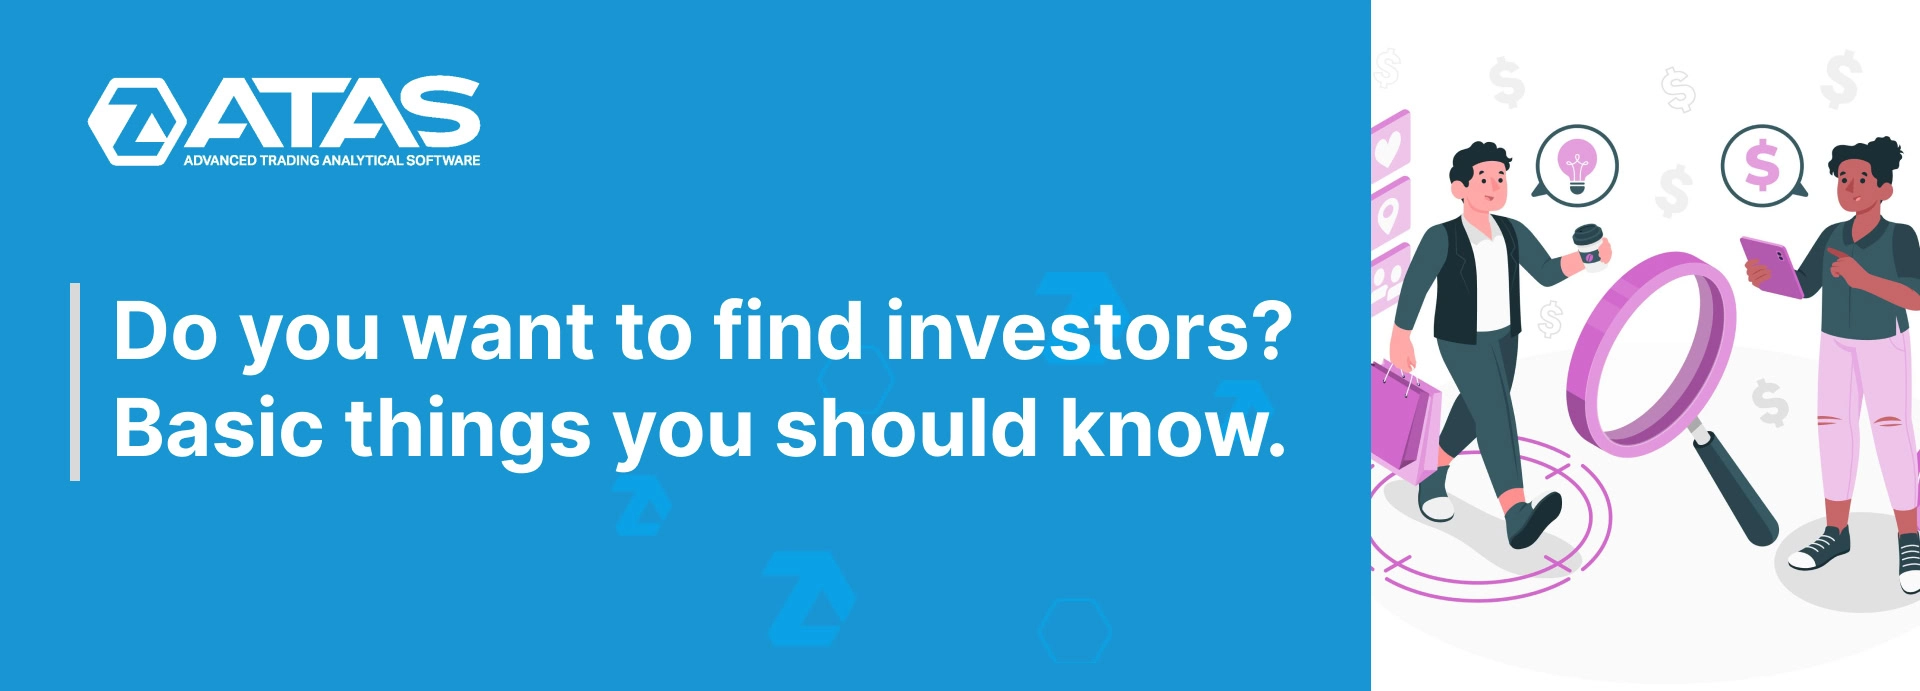 Do you want to find investors Basic things you should know.